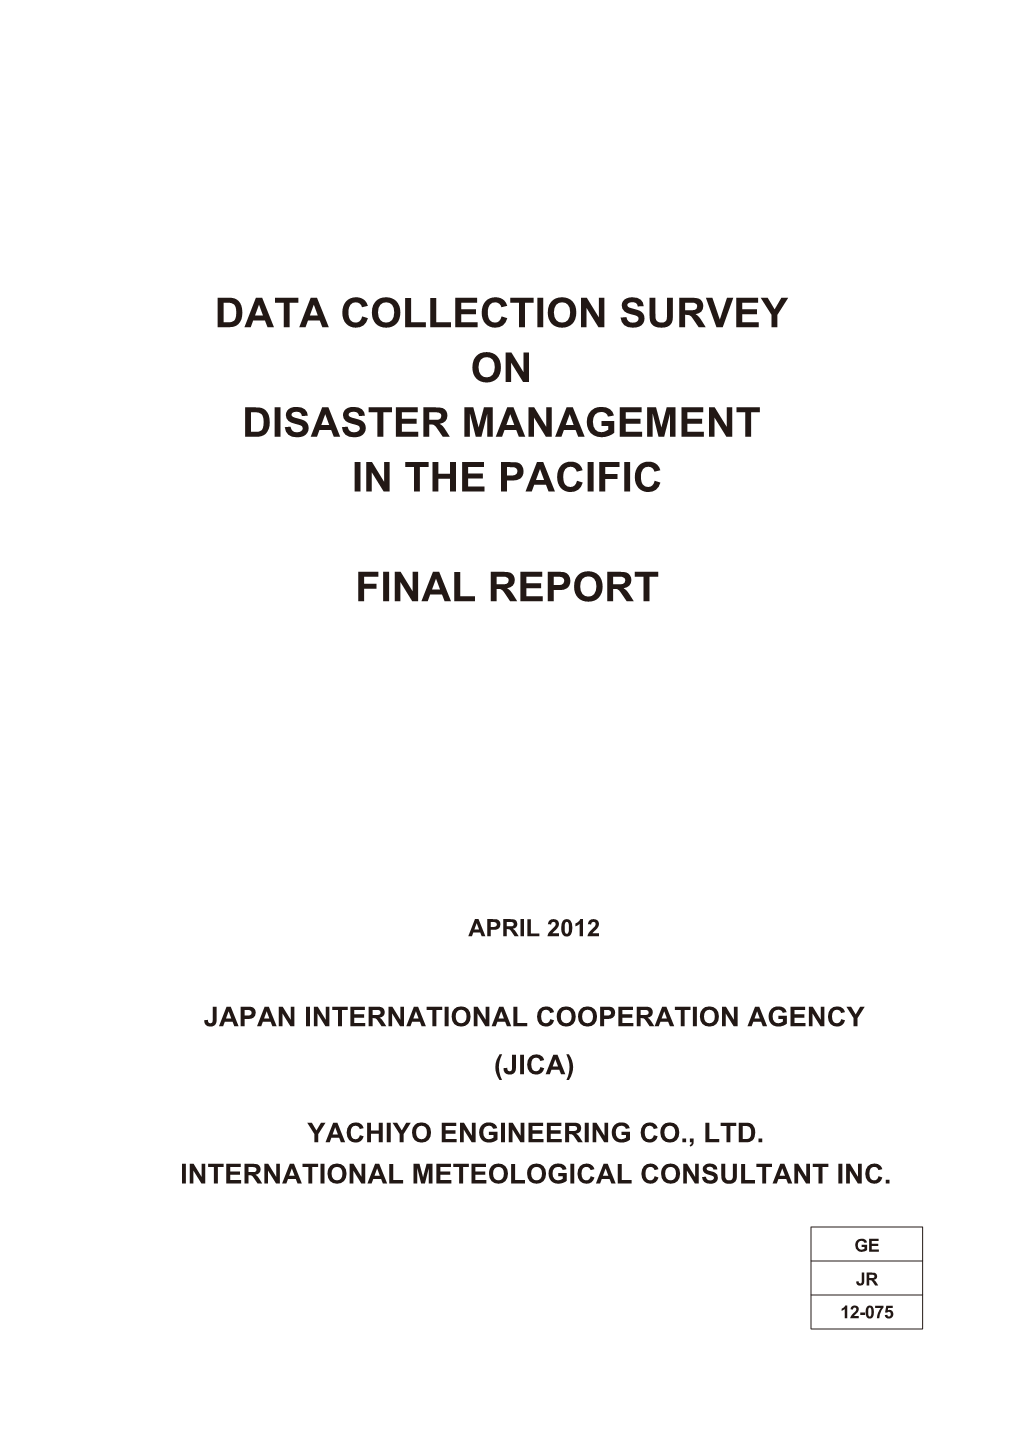 Data Collection Survey on Disaster Management in the Pacific Final Report (April, 2012)